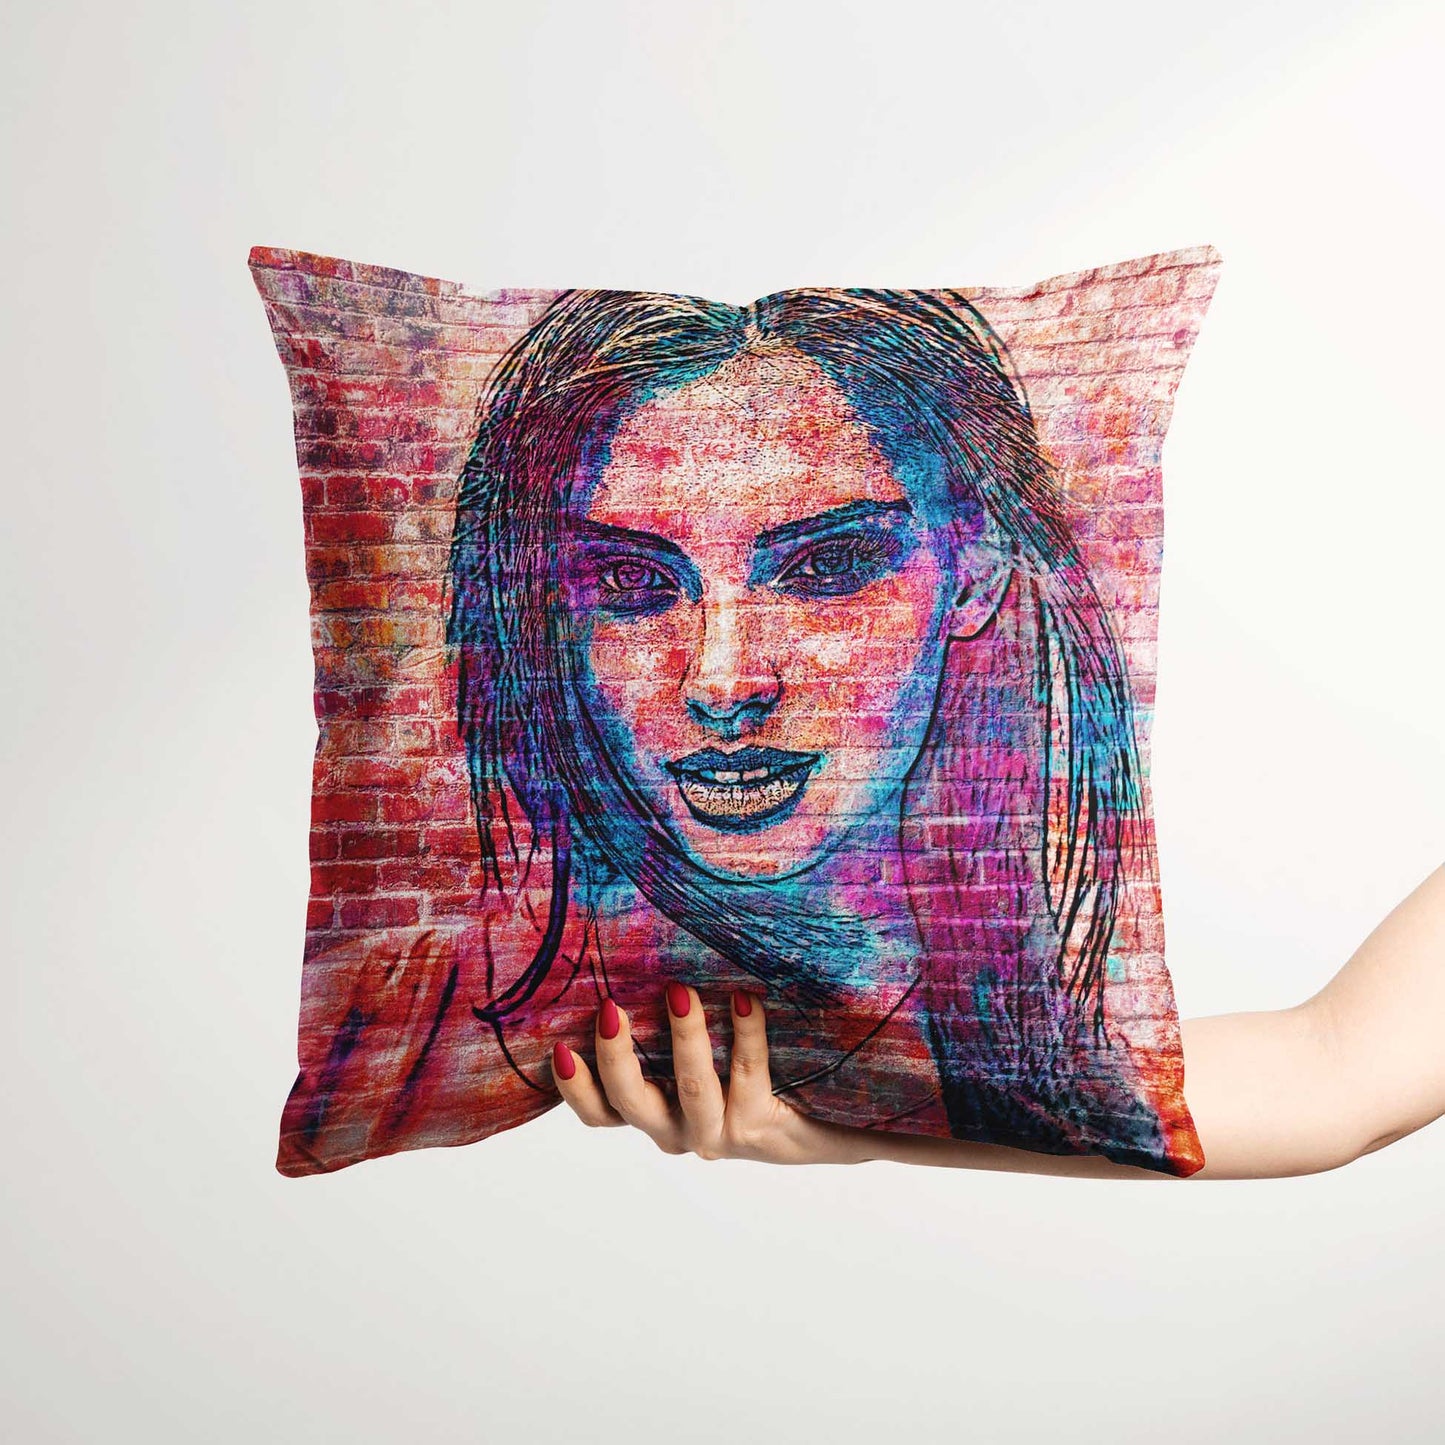 Experience the artistic beauty of street art with the Personalised Brick Graffiti Street Art Cushion. Handcrafted with attention to detail and made from soft velvet, it provides a luxurious and comforting touch